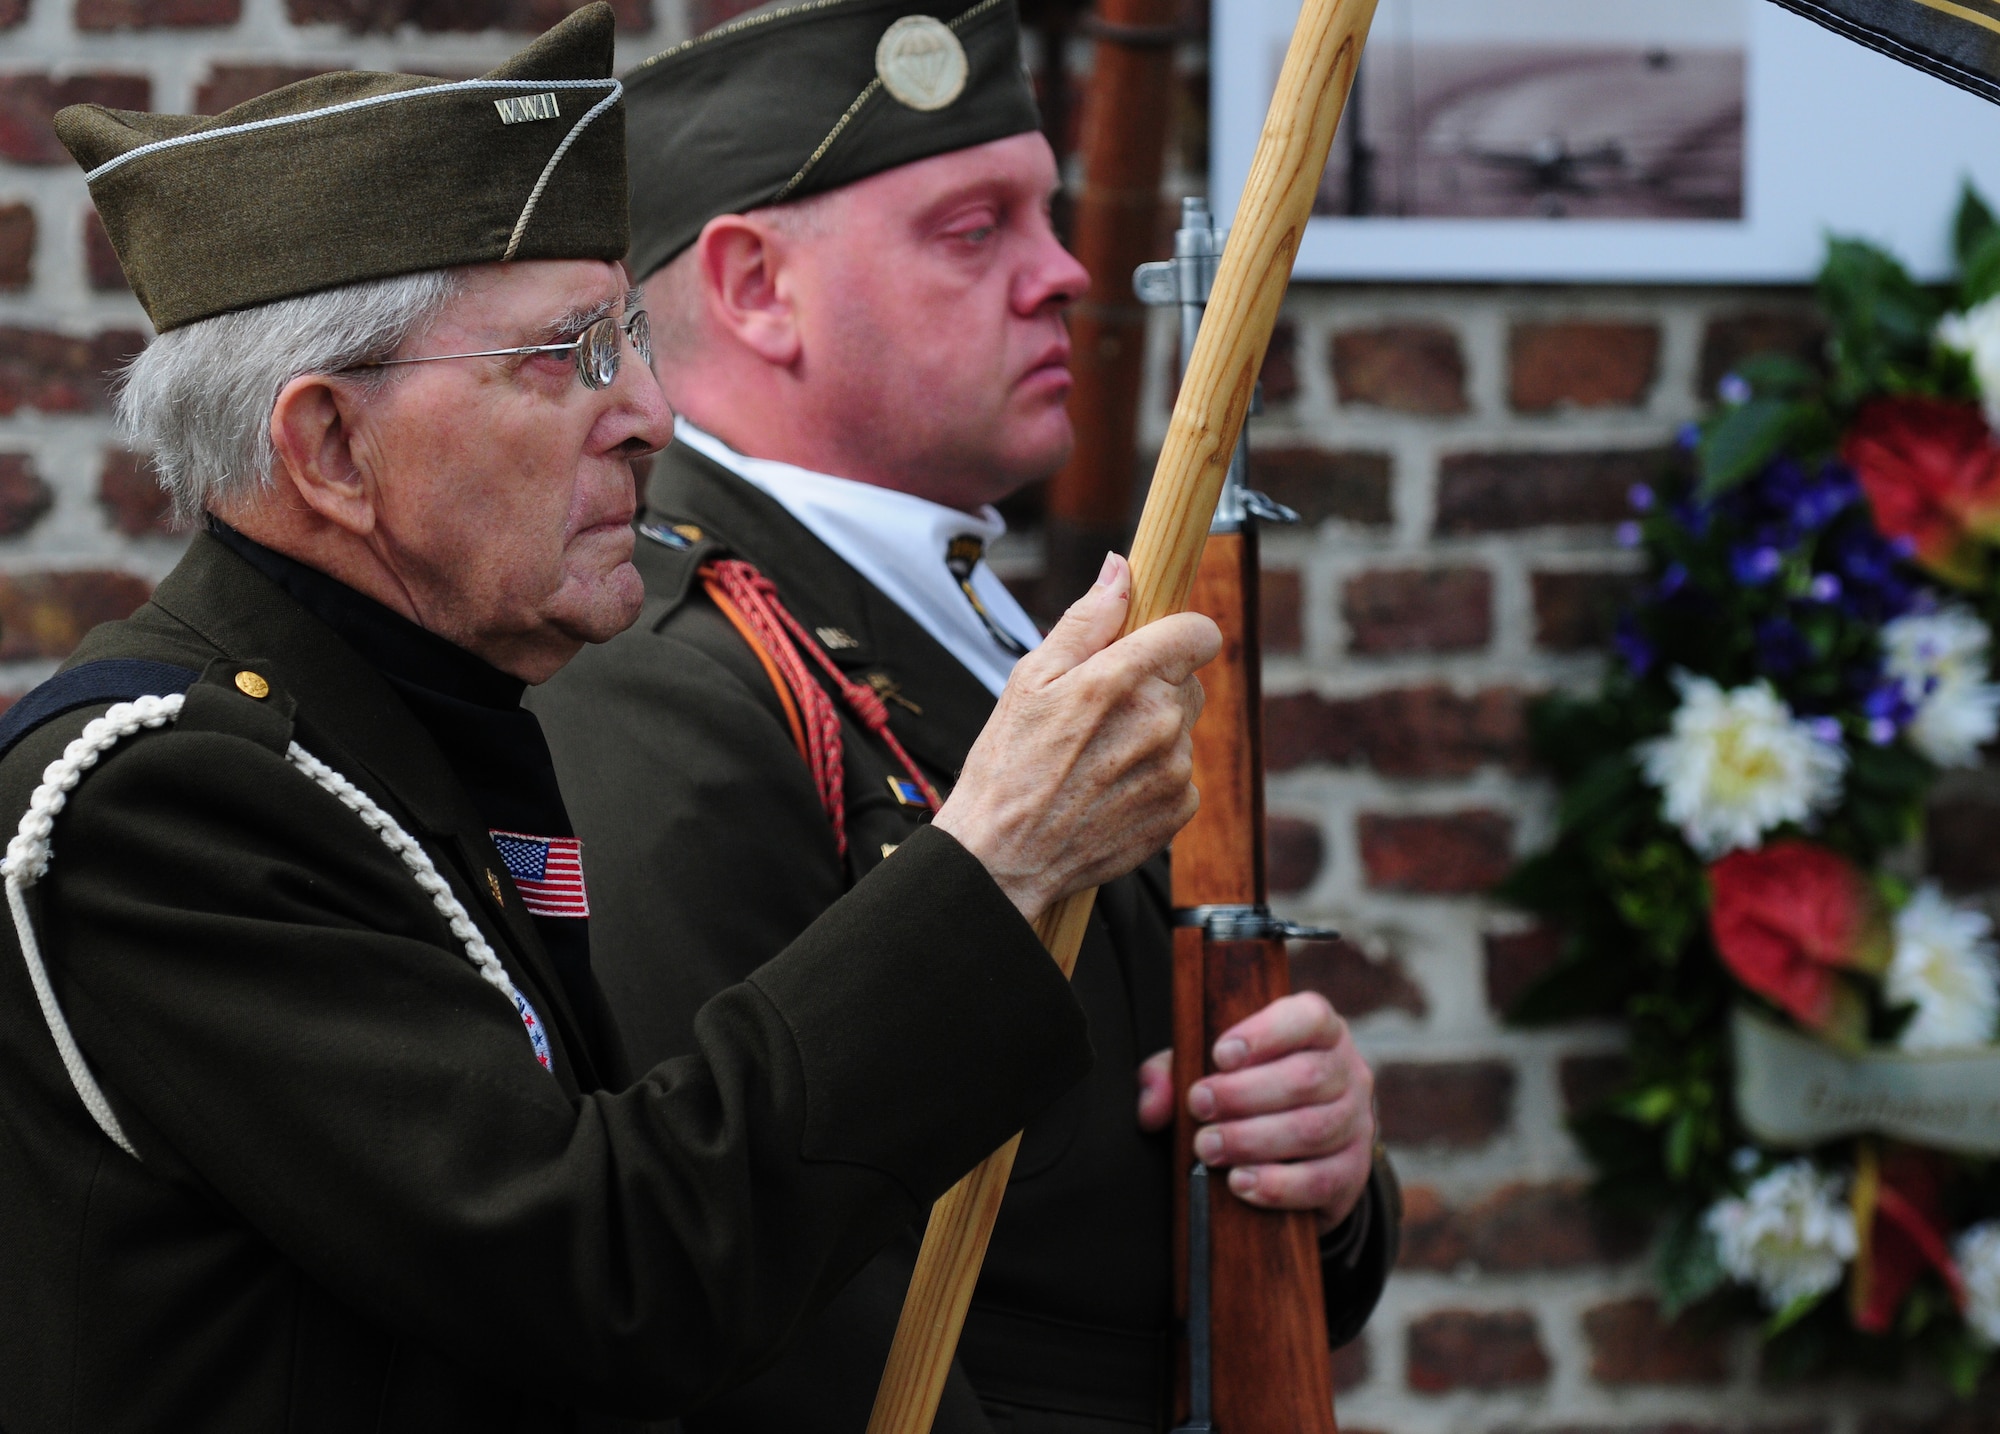 BORLO, Belgium – Maurice Sperandieu, a Belgian World War II veteran, left, and Frank De Rudder, World War II Honor Guard commander, stand at attention during a Belgian 9-11 memorial ceremony here Sept. 11. U.S. service members and Belgian World War II Honor Guard Team members, along with the local community, participated in this ceremony as part of the Belgian Open Monument Day in remembrance of the victims of the Sept. 11, 2001 terrorist attacks on the United States. (U.S. Air Force photo/Airman 1st Class Matthew B. Fredericks)